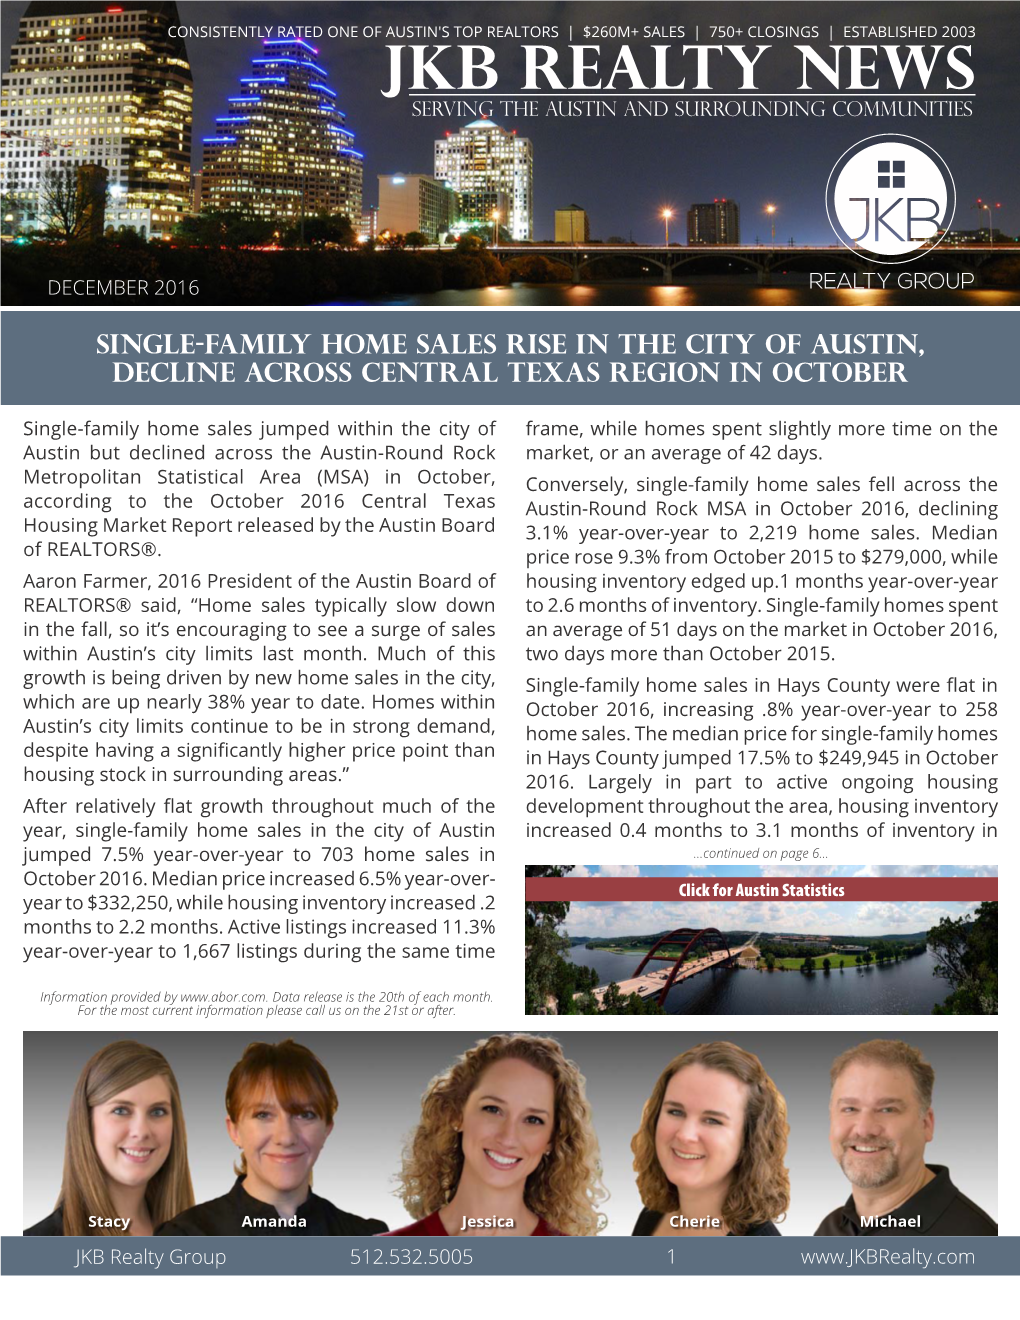 JKB Realty News Serving the Austin and Surrounding Communities